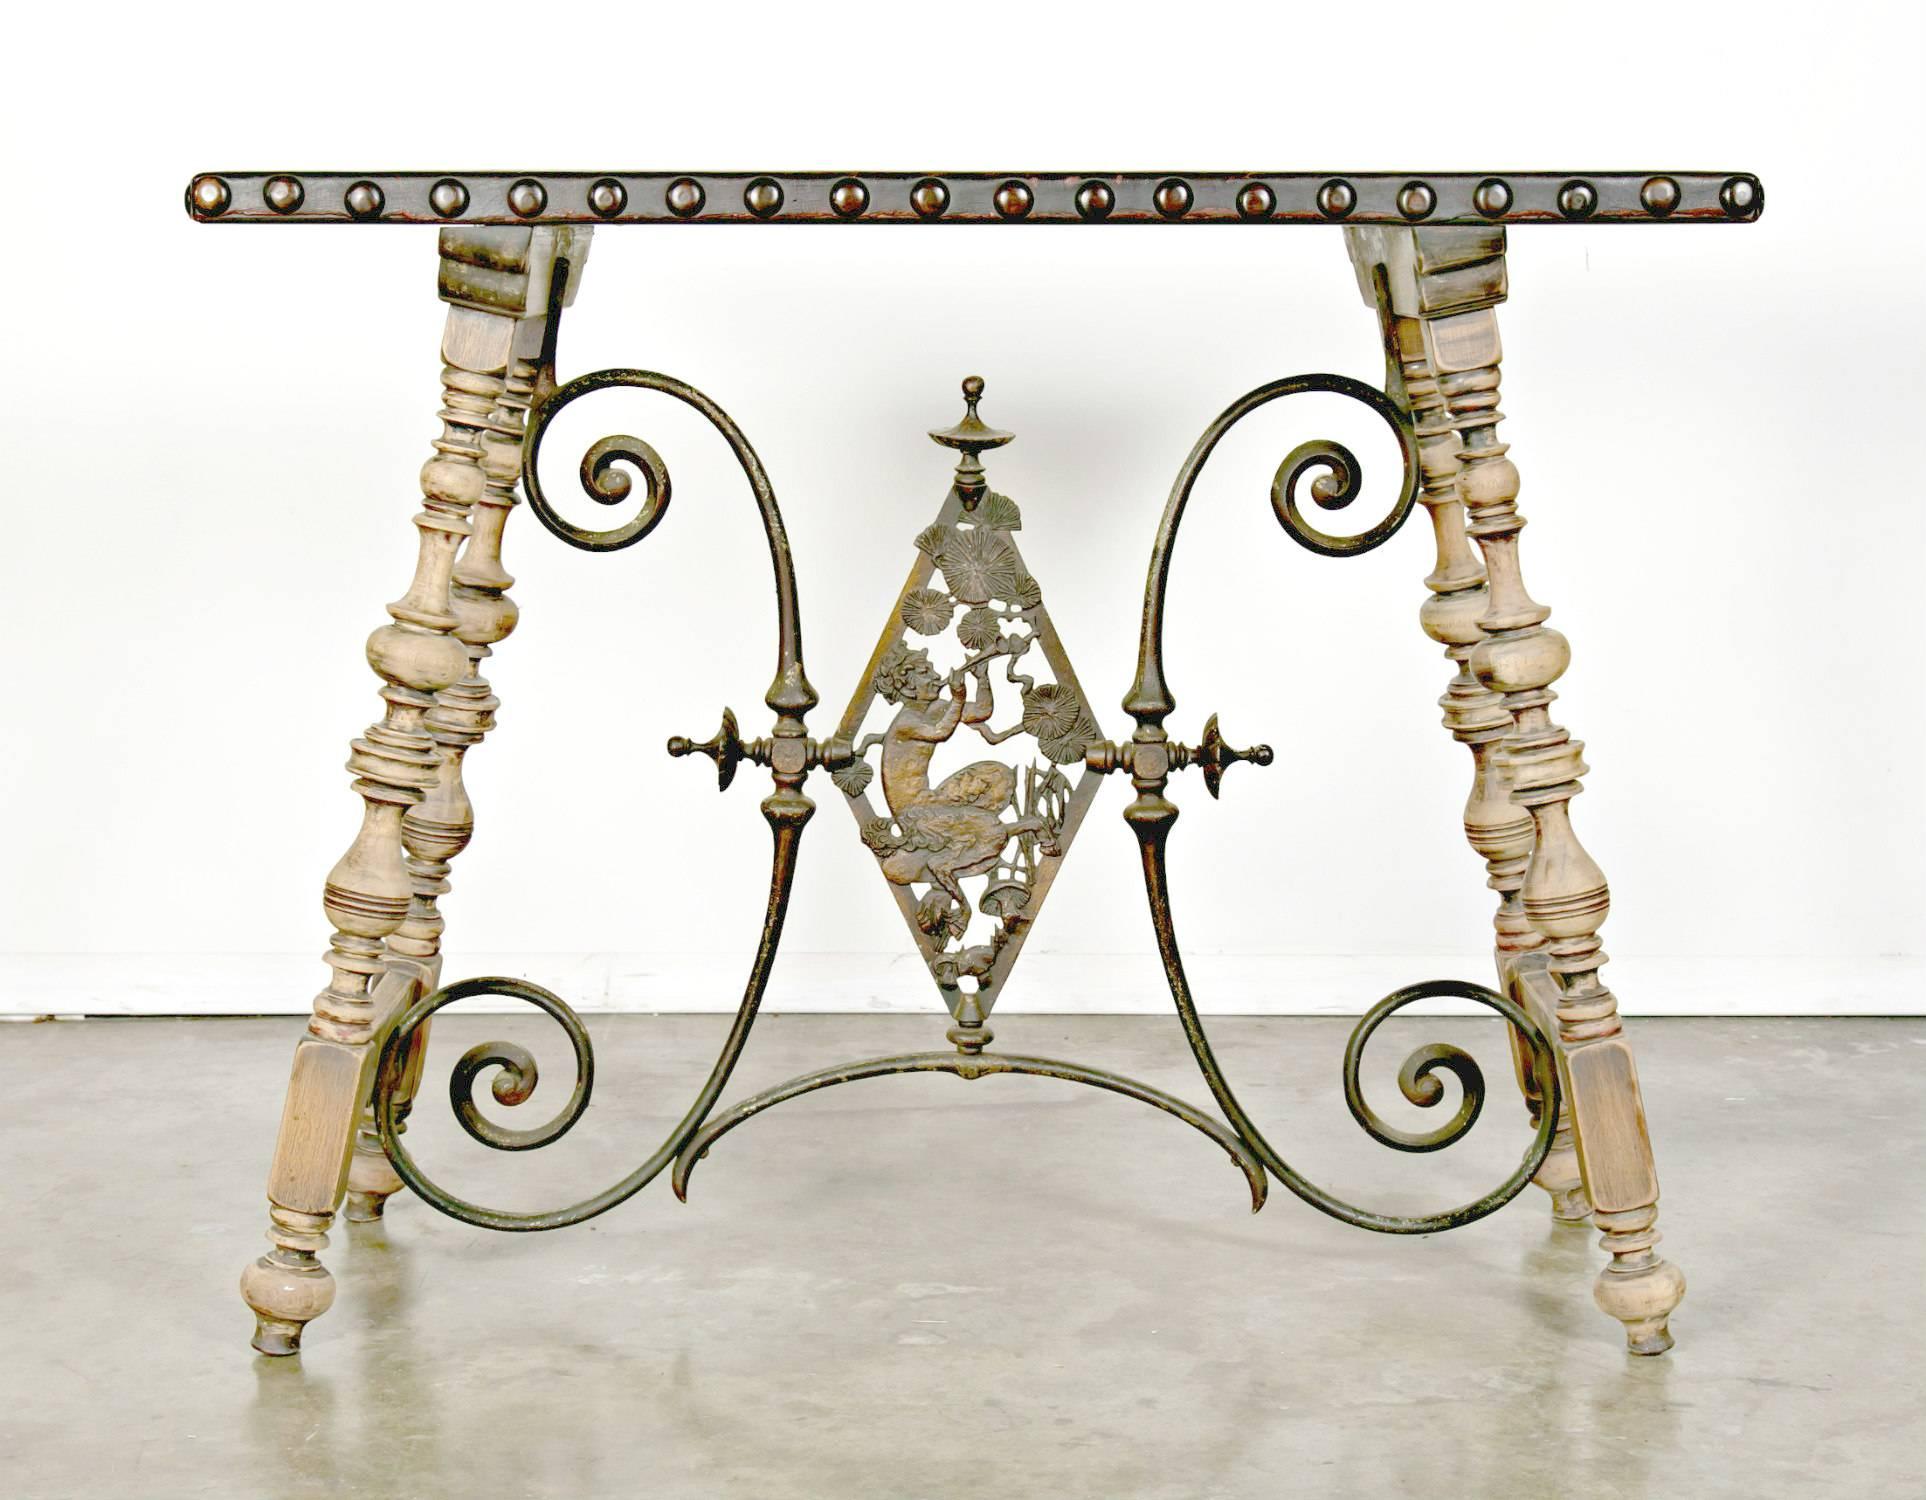 Wonderful 1920s Oscar Bach Art Deco console, having a leather top with large nailhead trim. The turned walnut legs, joined by a cast iron stretcher with a bronze patina and embellished with an ornate satyr motif, show traces of original polychrome.